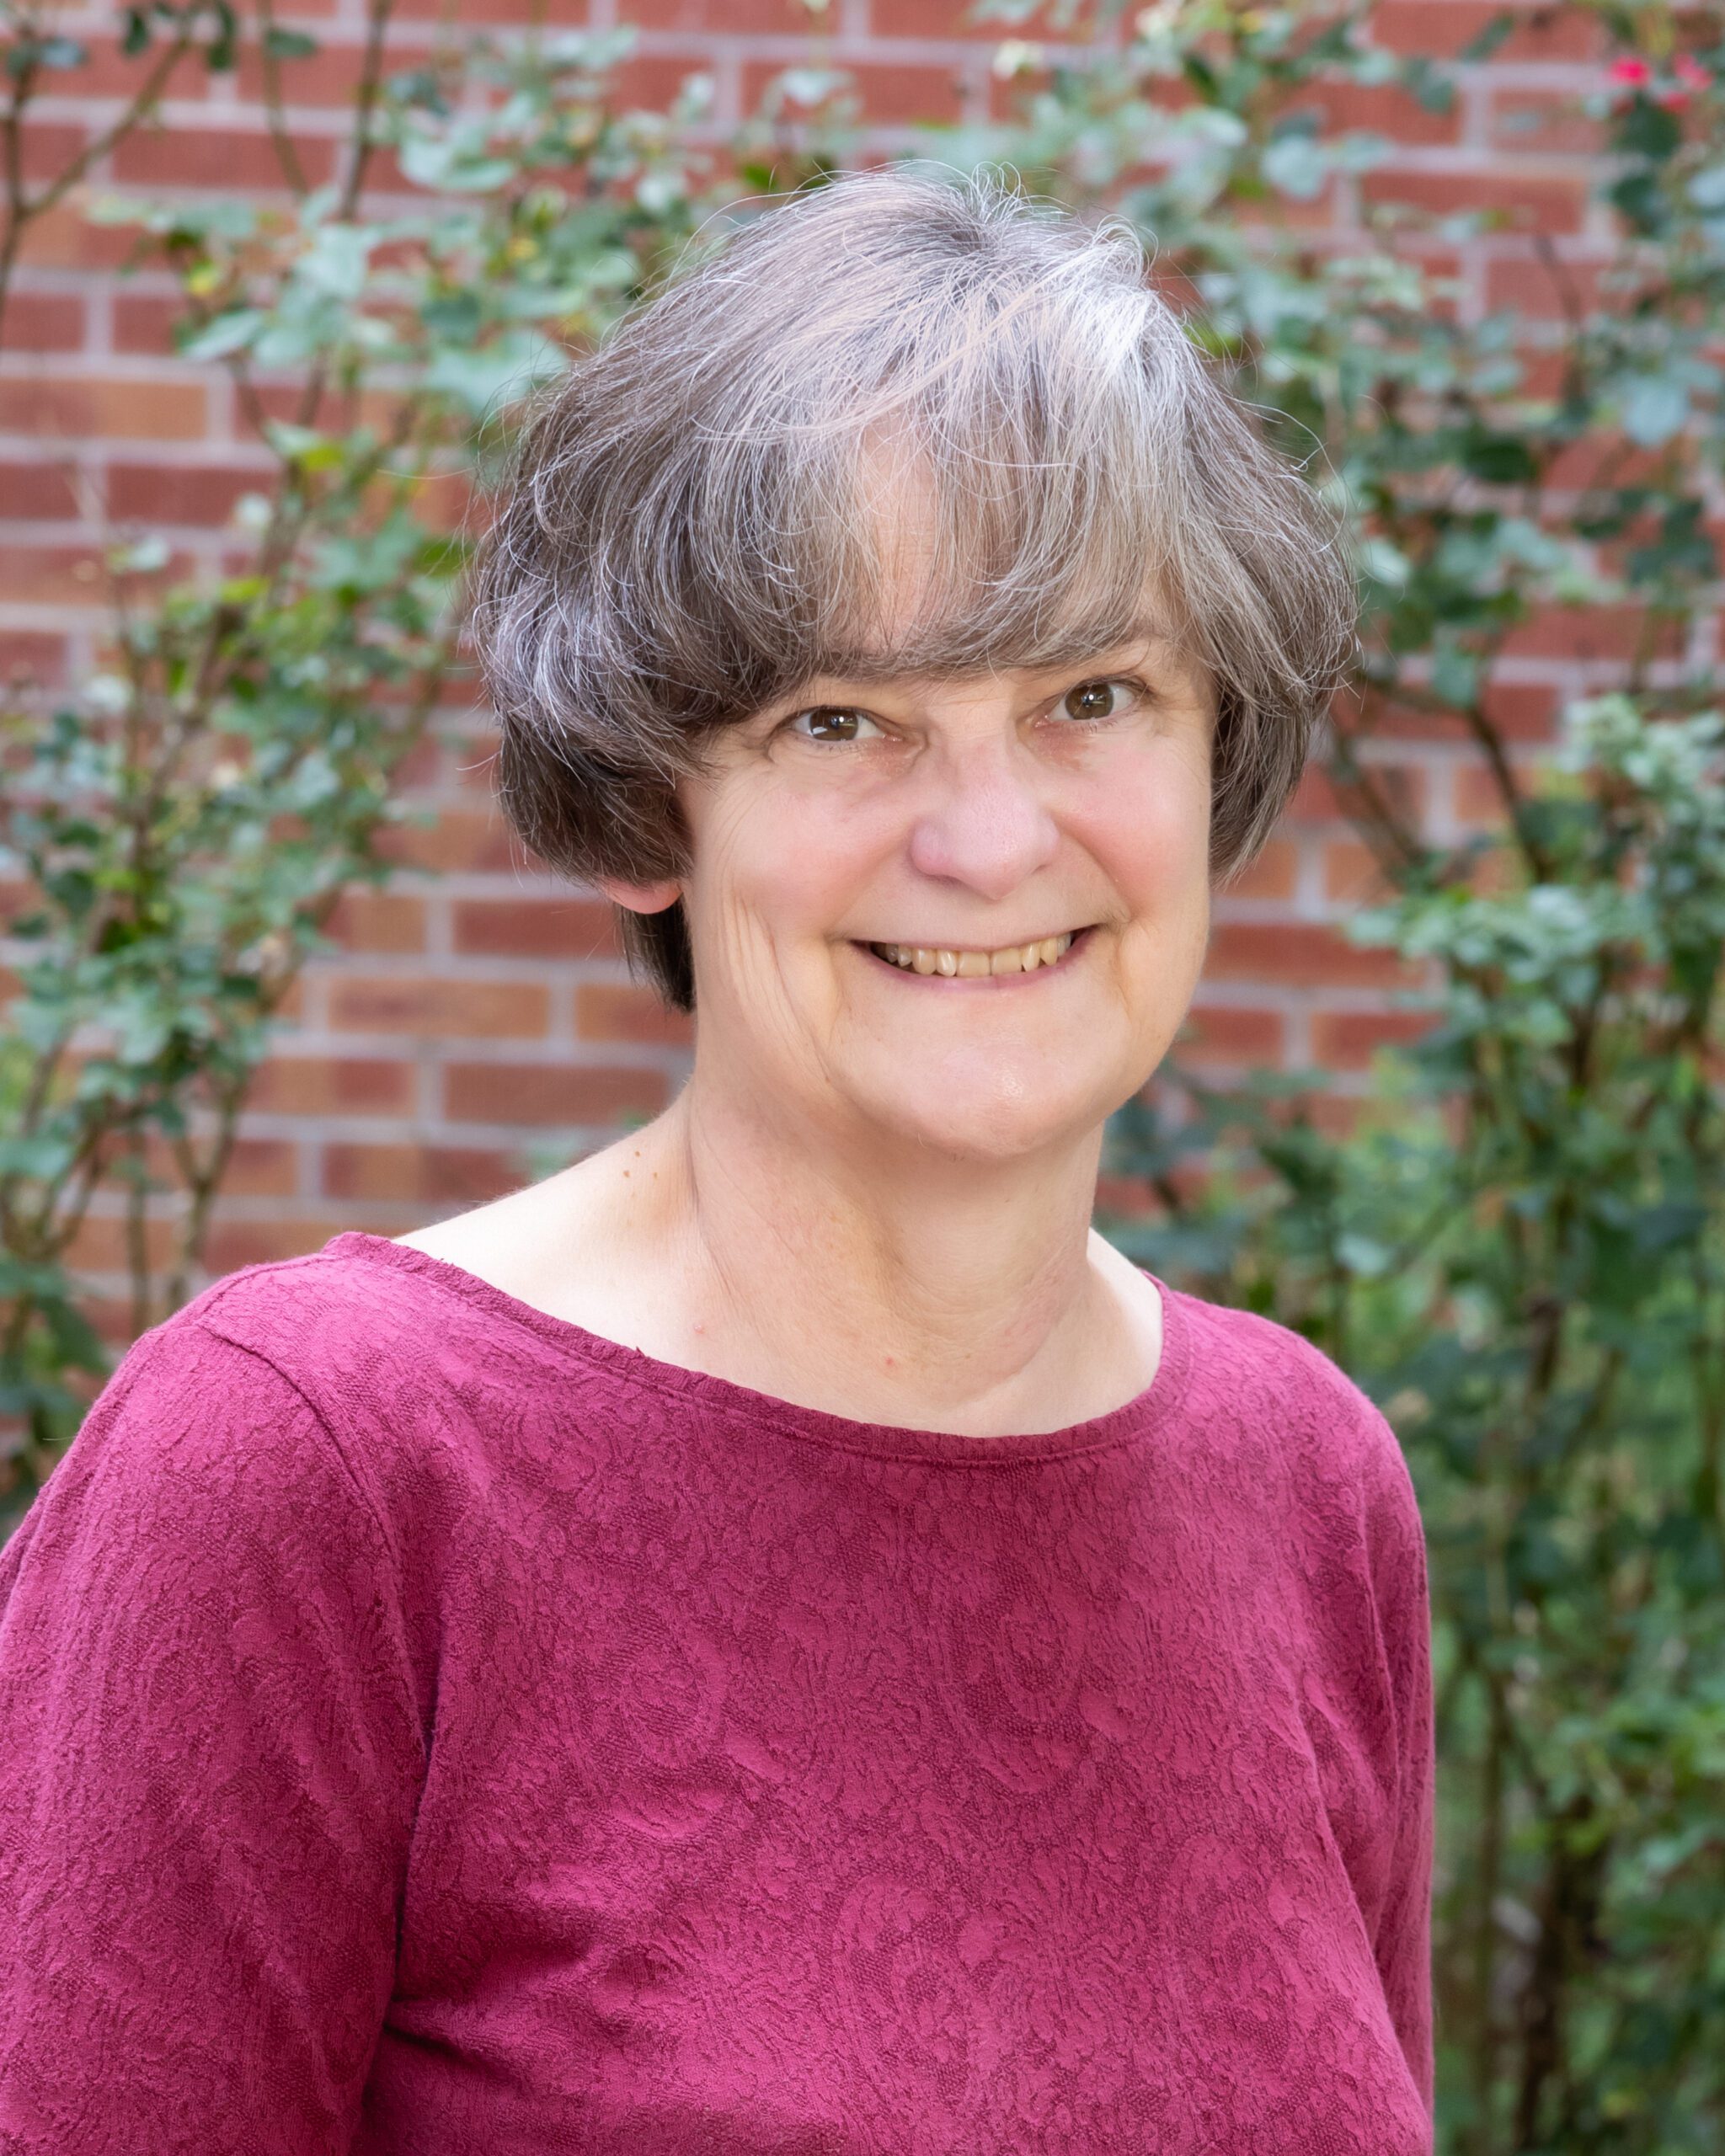 Anne MacMaster serves as Professor of English and E. B. Stewart Professor of Language and Literature